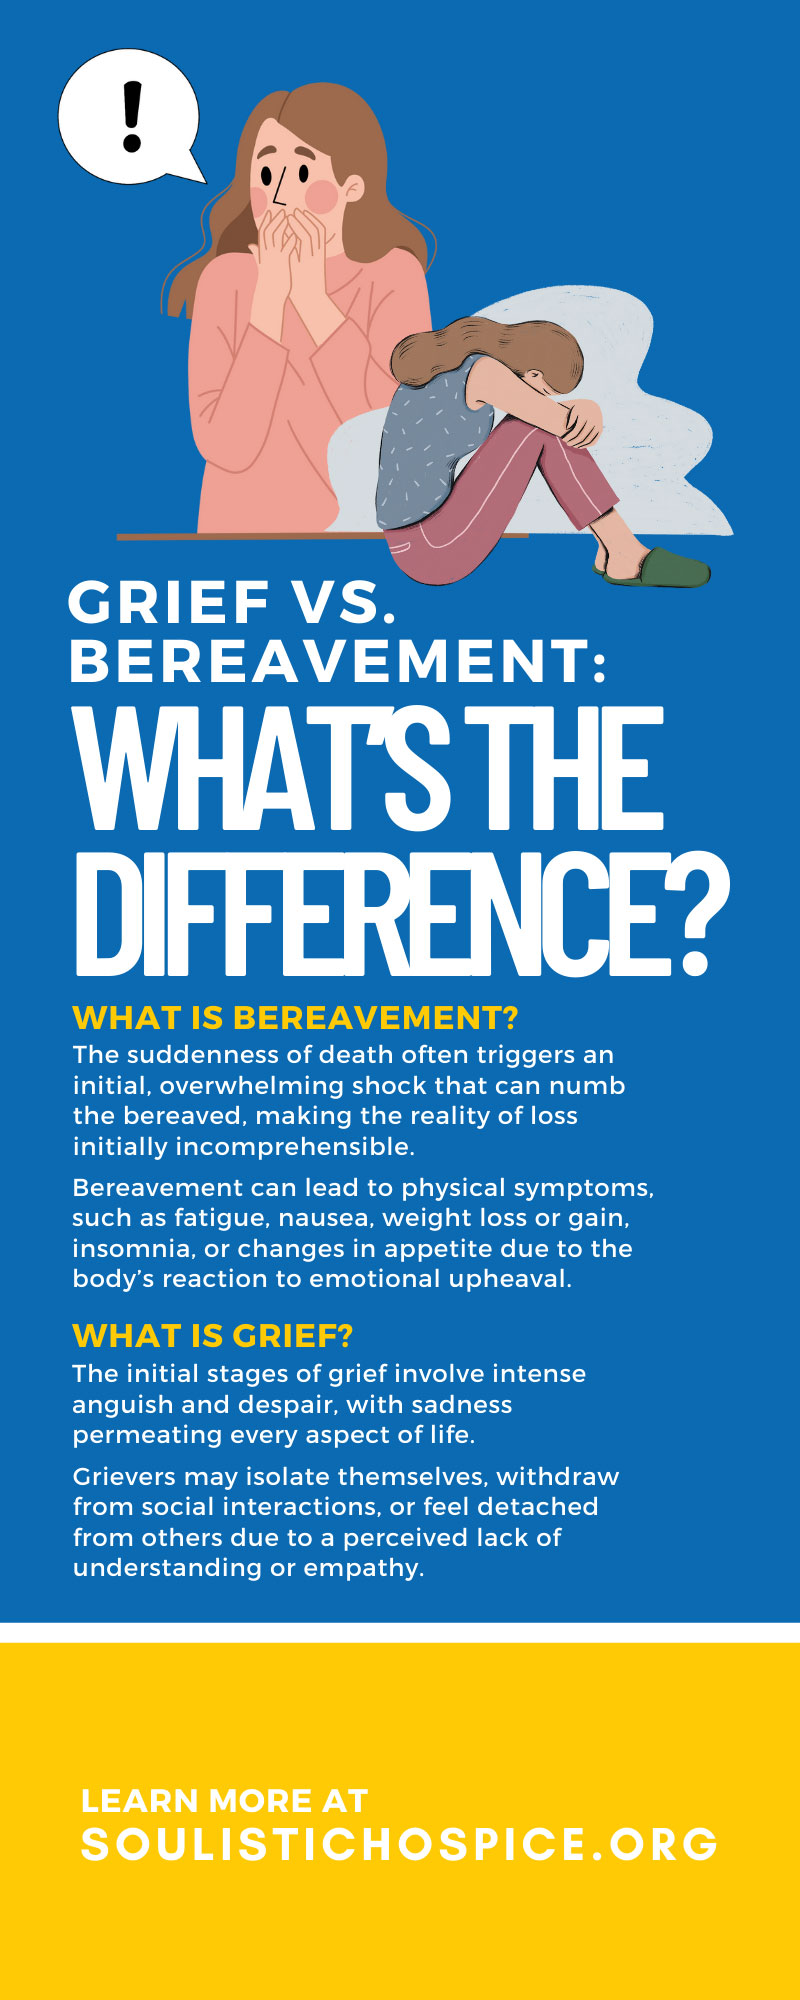 Grief vs. Bereavement: What’s the Difference?